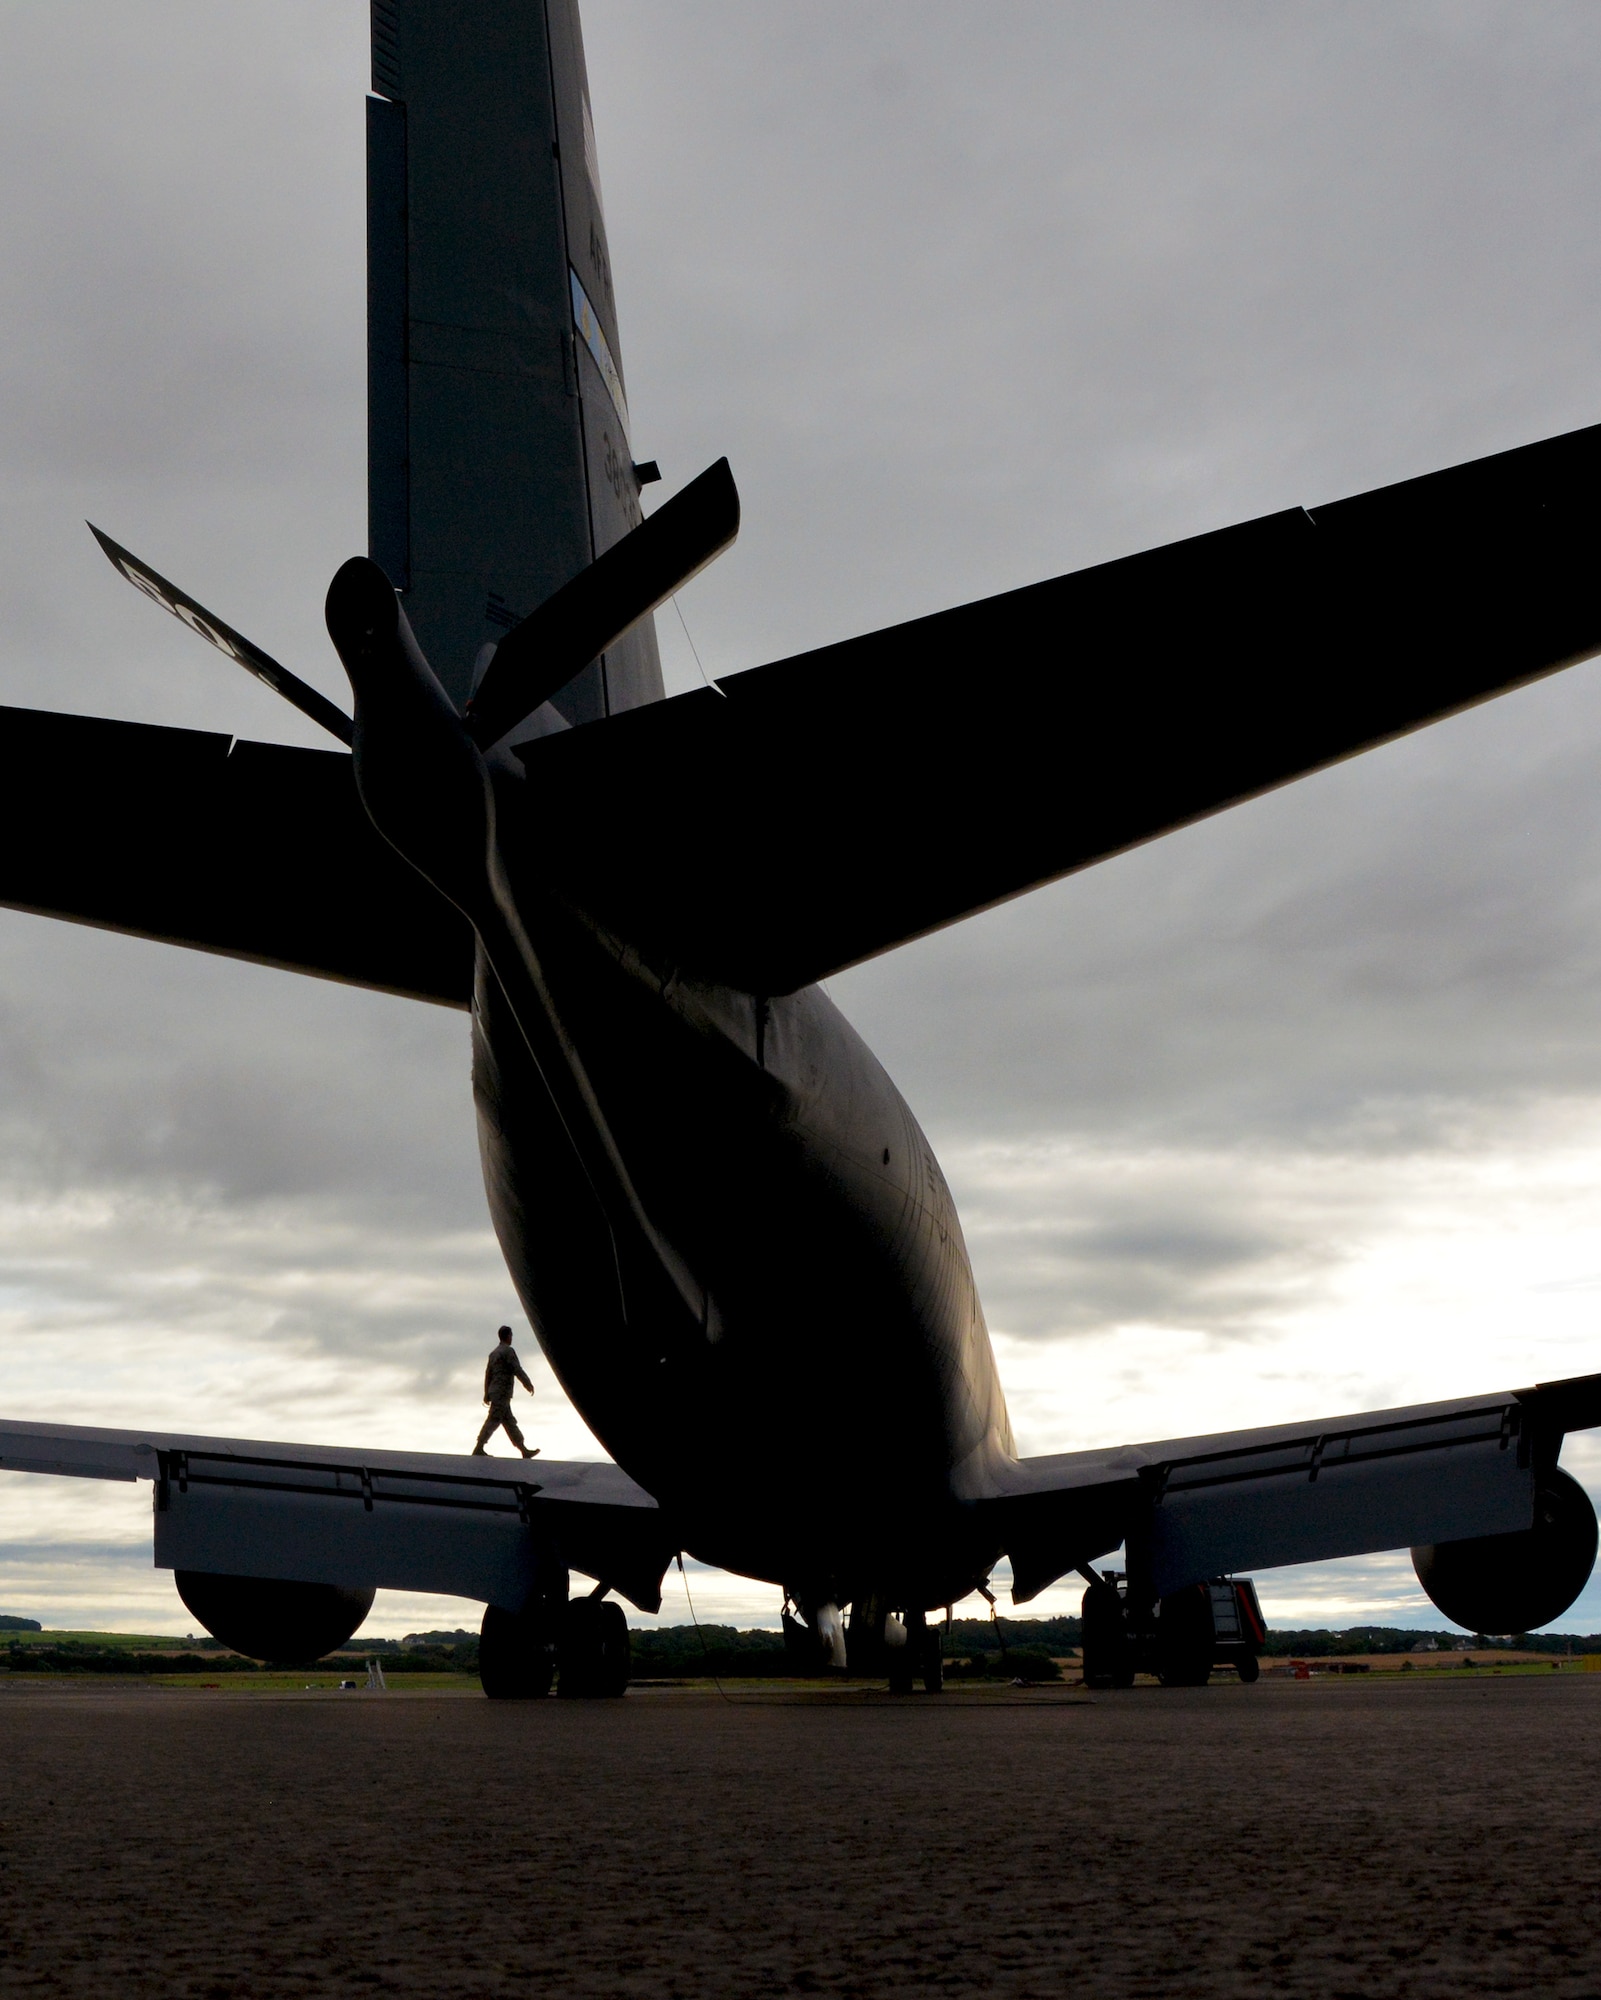 Staff Sgt. Travis Krause, 507th Aircraft Maintenance Squadron crew chief from Tinker Air Force Base, Okla., performs a visual inspection on the wing of a KC-135R Stratotanker before flight at Glasgow Prestwick Airport, Scotland, Aug. 27, 2017. 507th Air Refueling Wing Reserve Citizen Airmen from Tinker AFB flew 16 aeromedical evacuation technicians from Scott AFB, Ill., to and from Scotland to provide in-flight medical training designed to strengthen skills and teamwork. (U.S. Air Force photo/Tech. Sgt. Samantha Mathison)